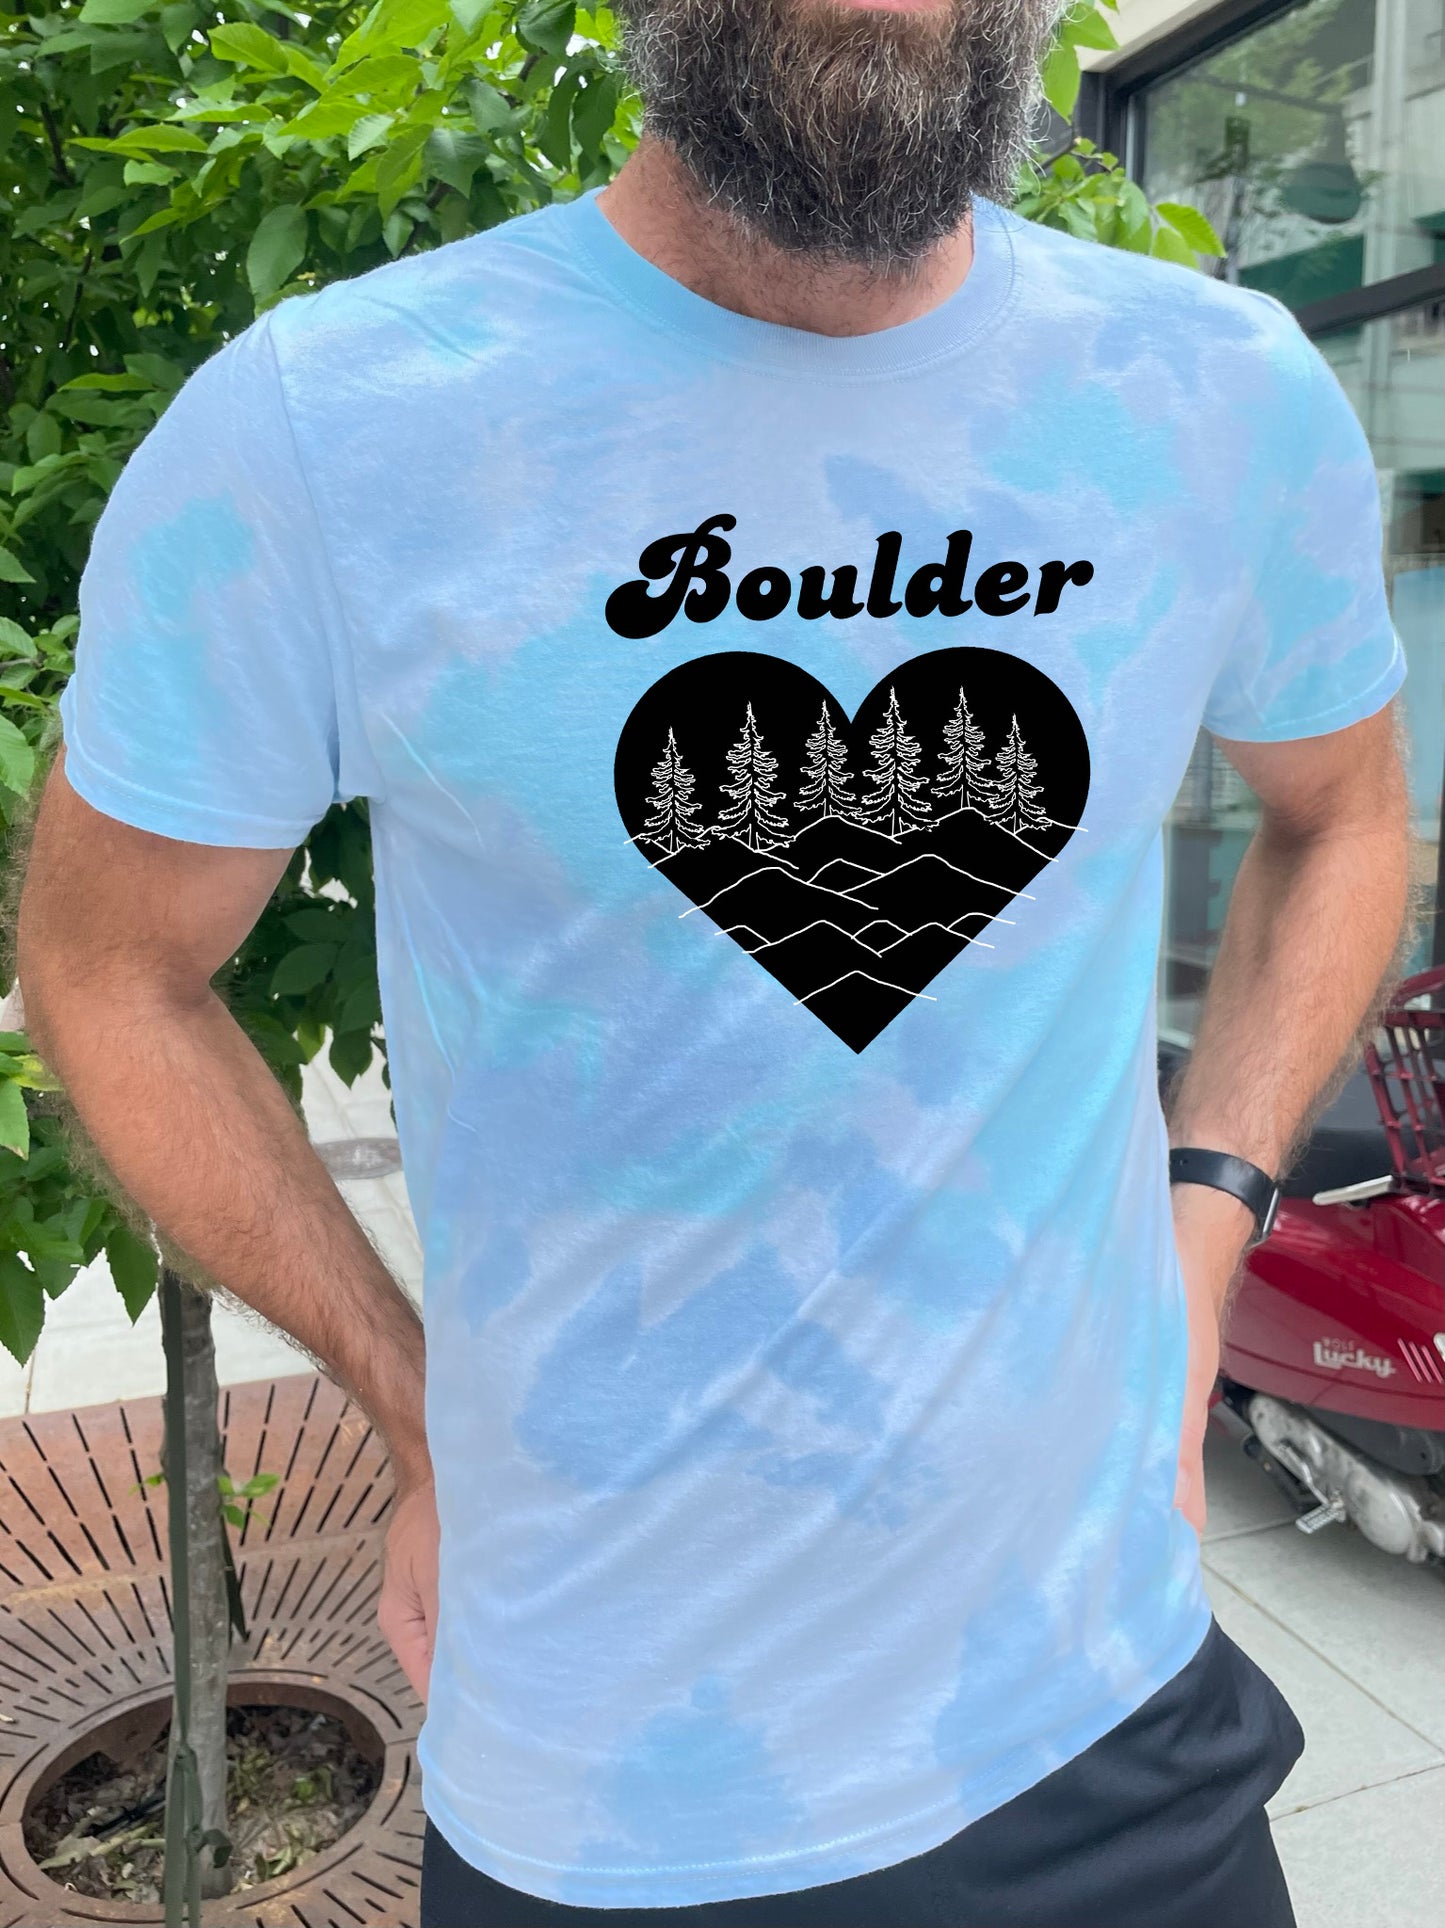 a man with a beard wearing a t - shirt that says boulder